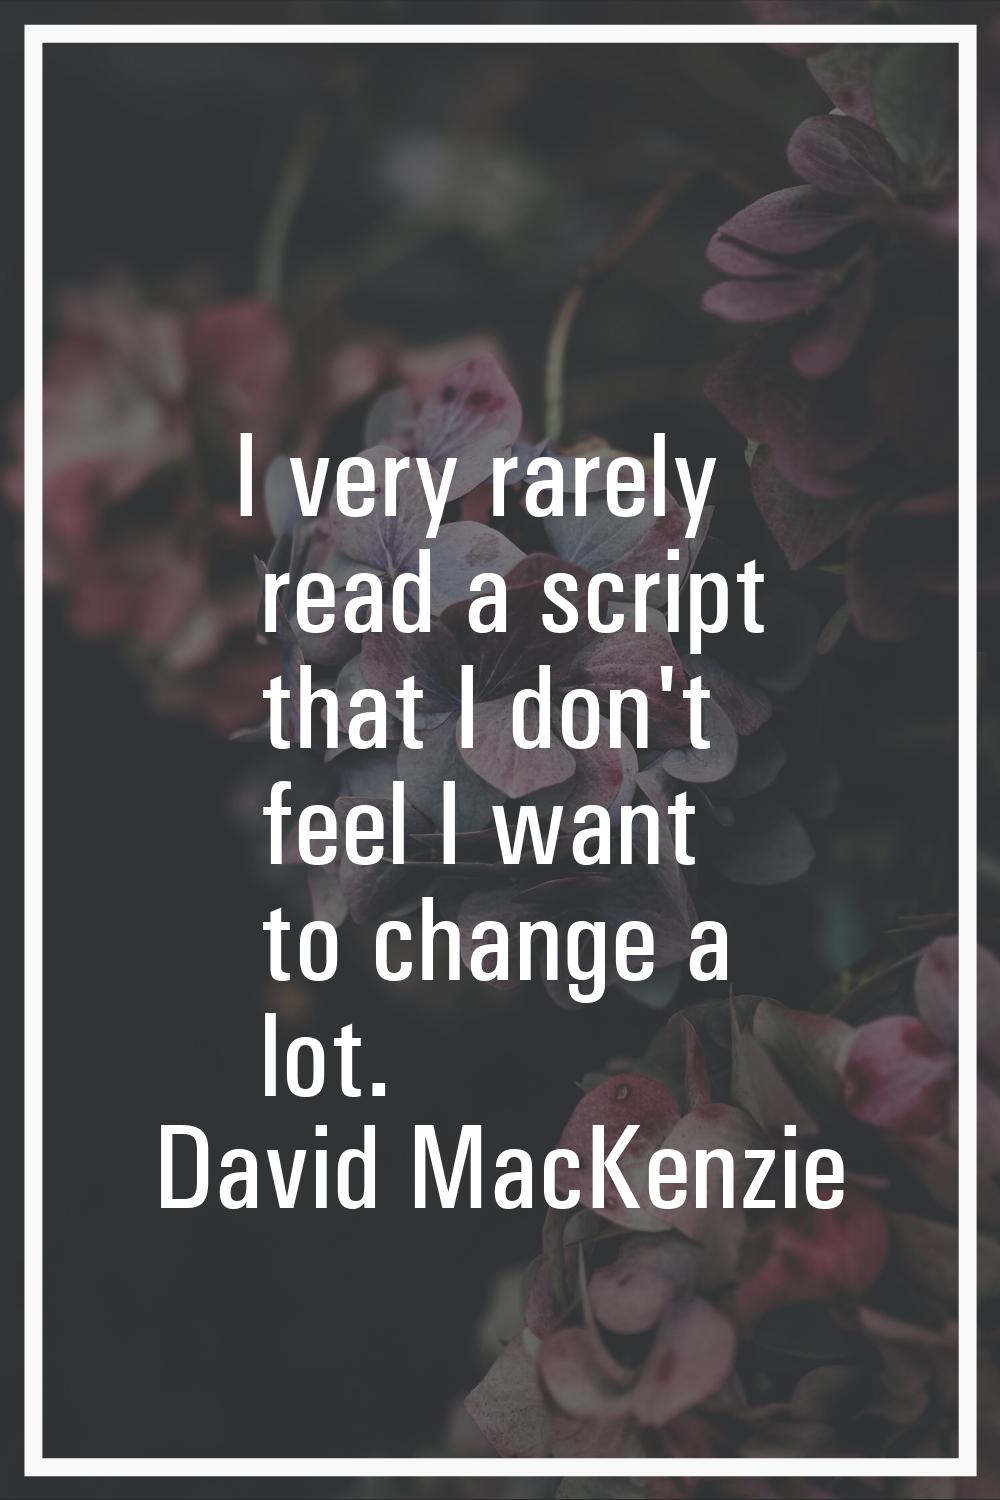 I very rarely read a script that I don't feel I want to change a lot.